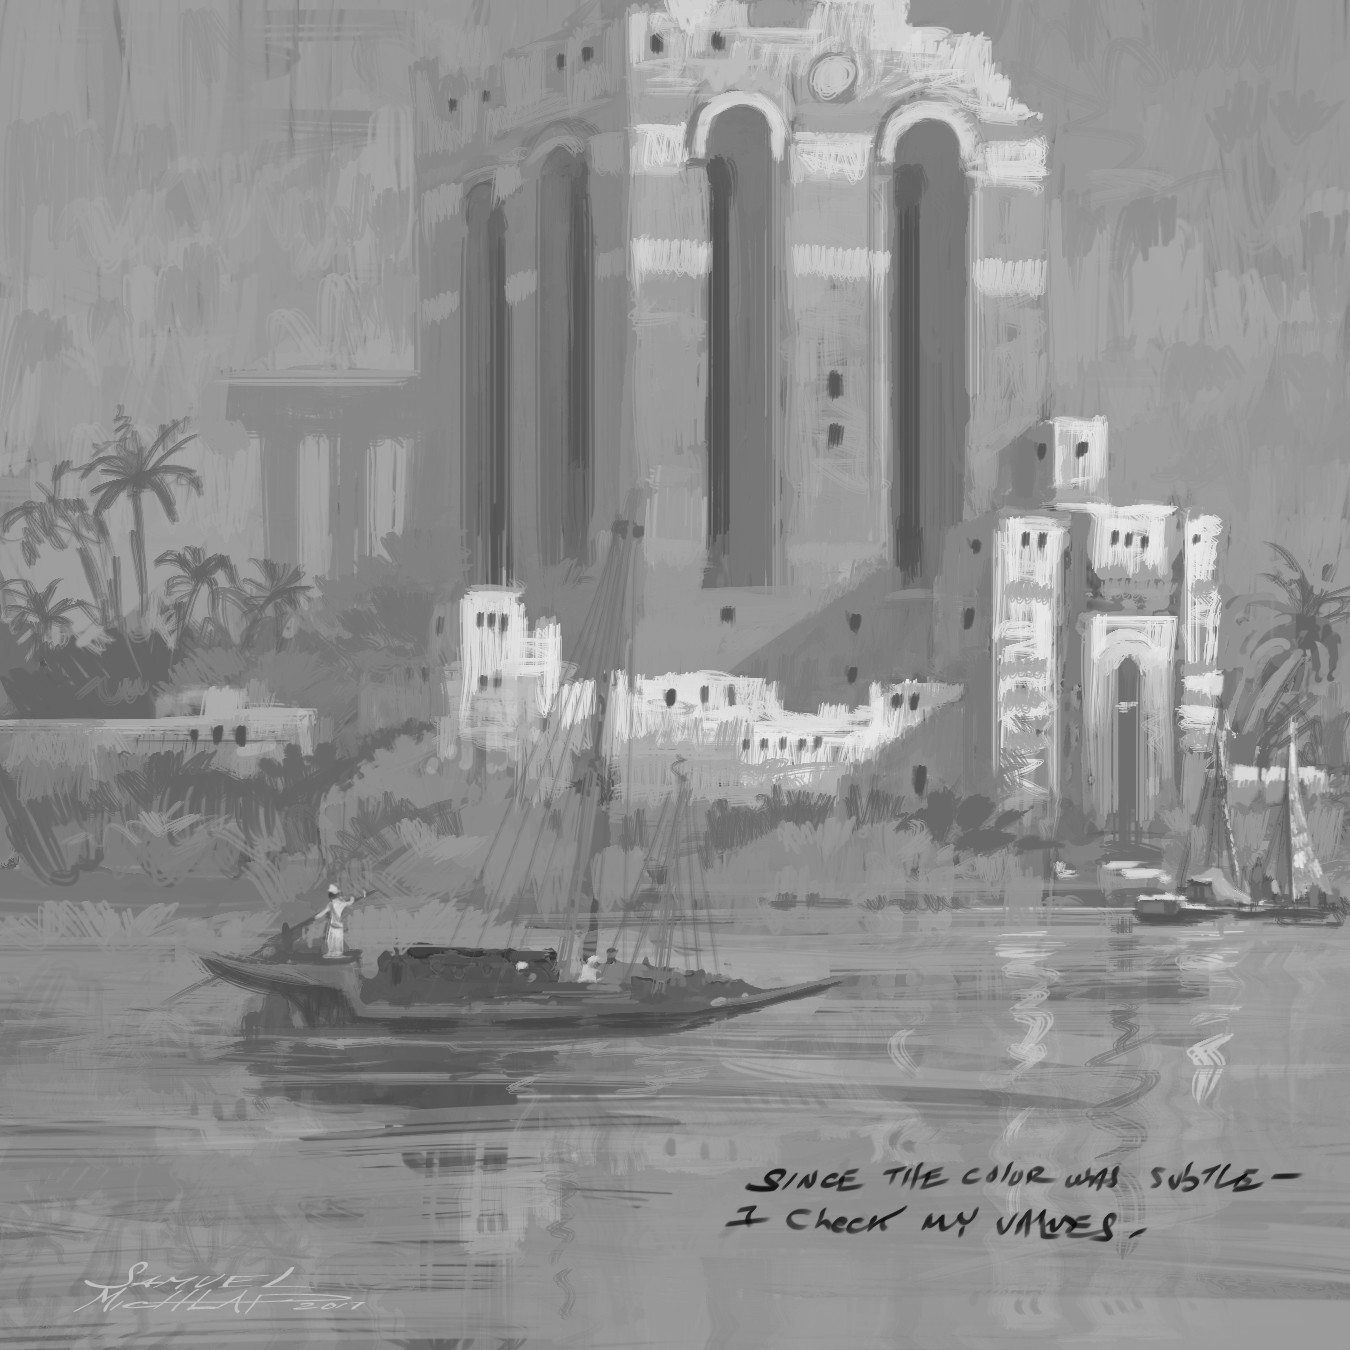 Along the Nile- checking my values